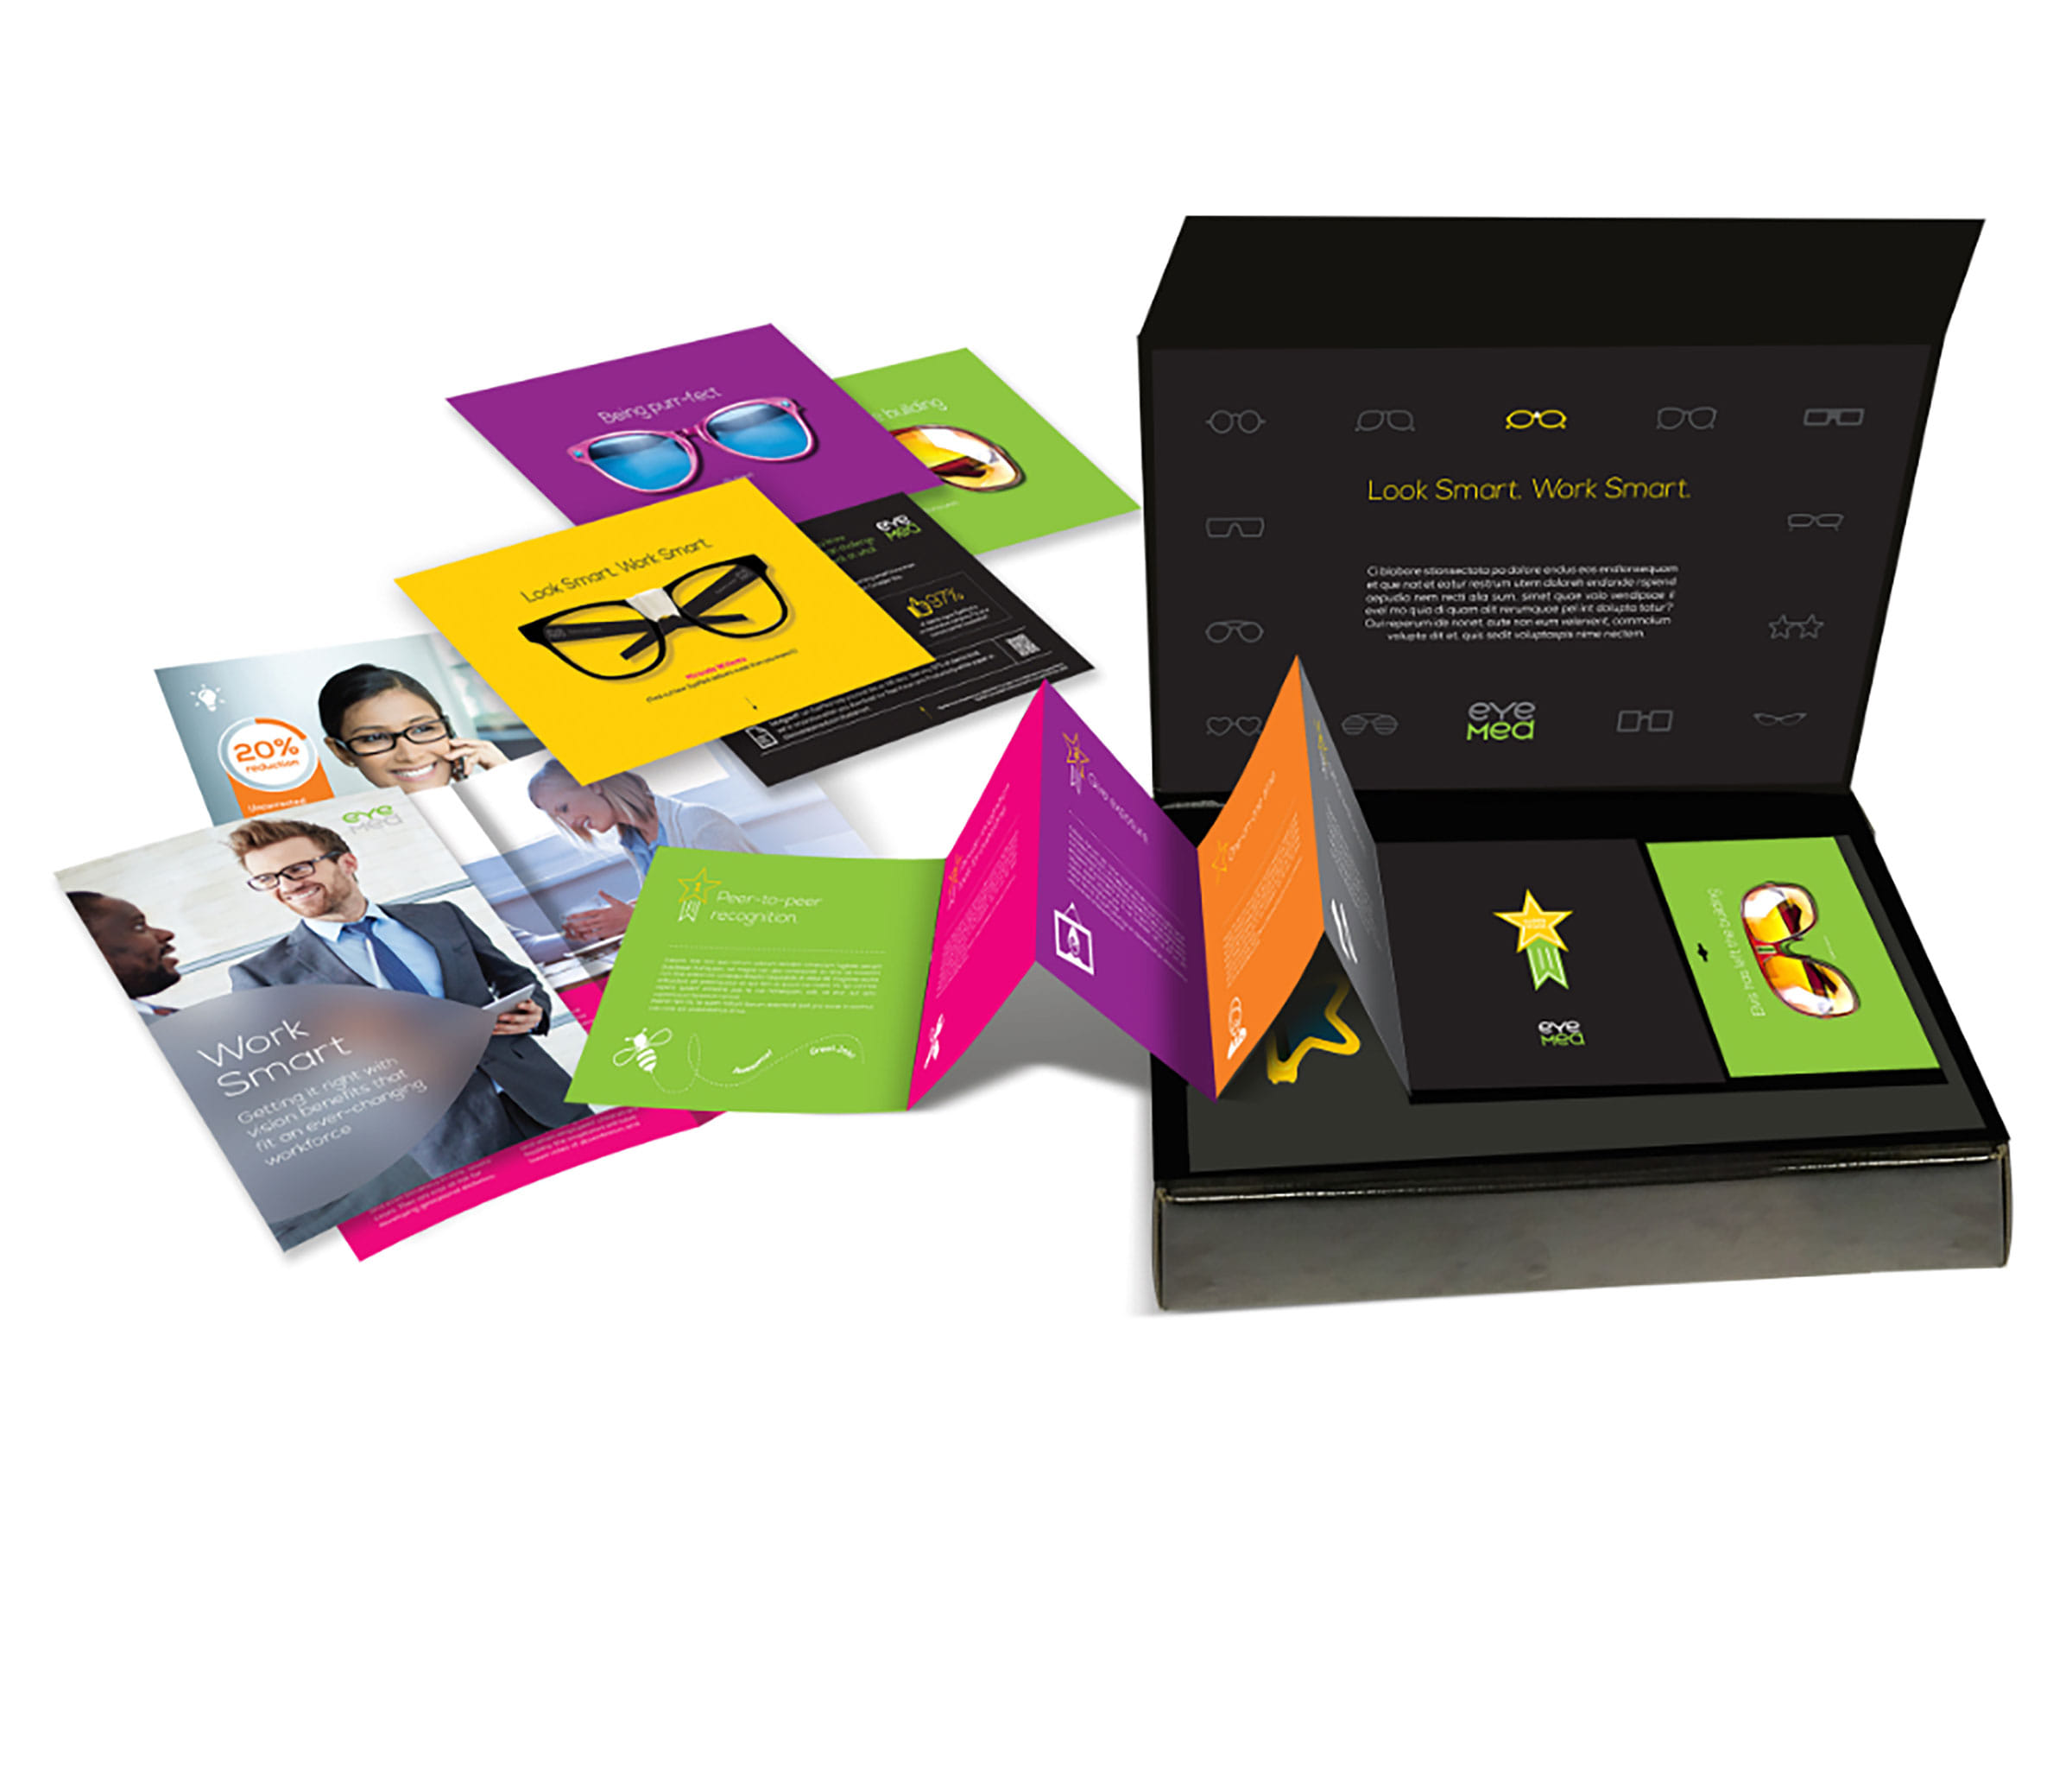 Sales Kit for an eyeglass company